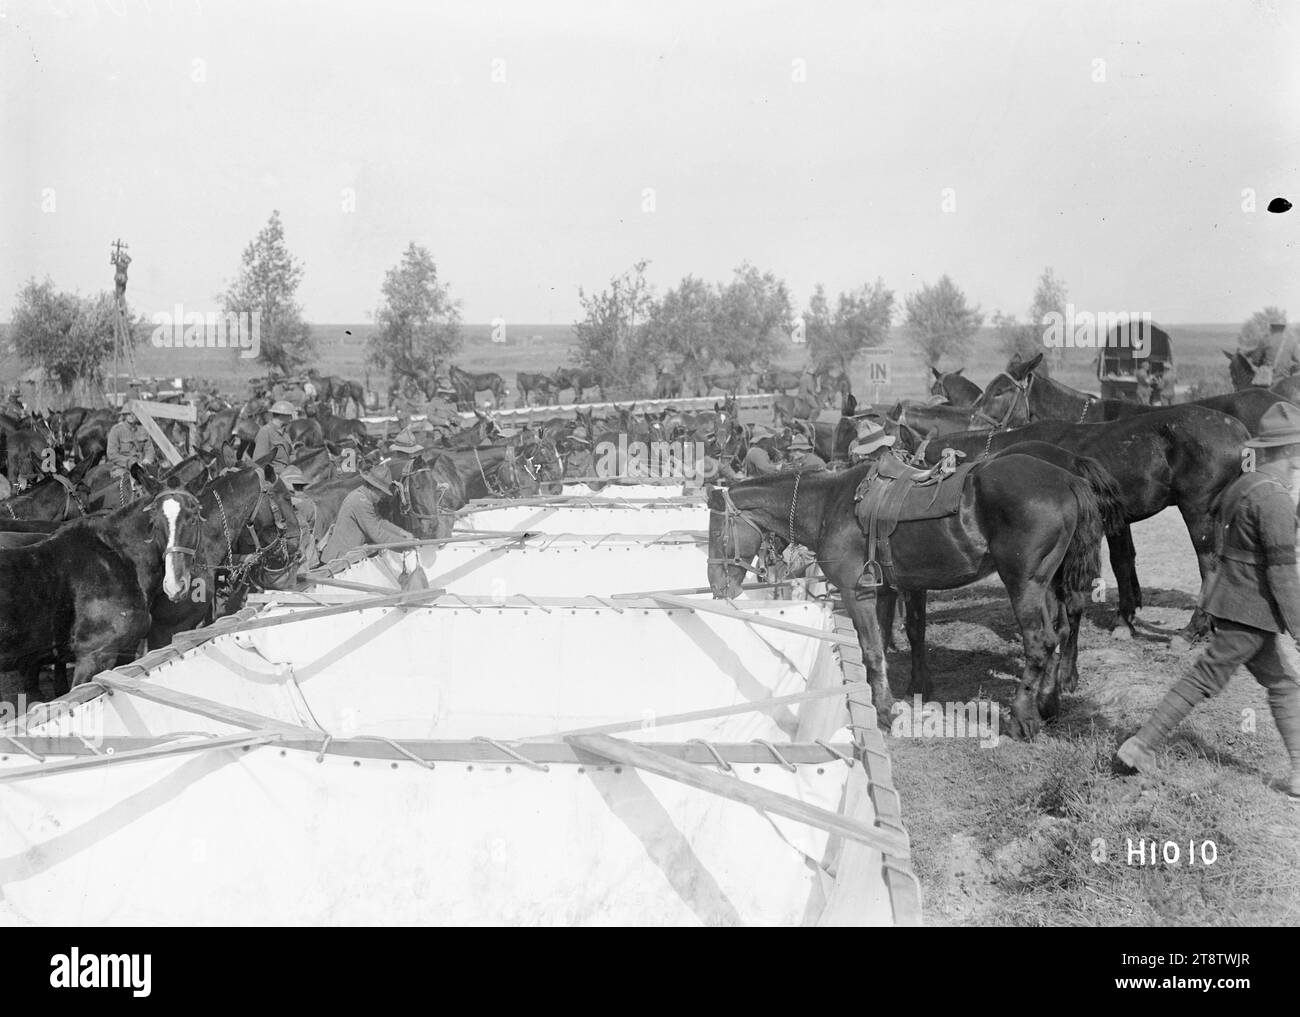 New Zealanders watering horses during World War I, France, New Zealand soldiers water their horses from a large canvas? trough during open warfare in France in World War I. Possibly an artillery horse line. Photograph taken 7 September 1918 Stock Photo